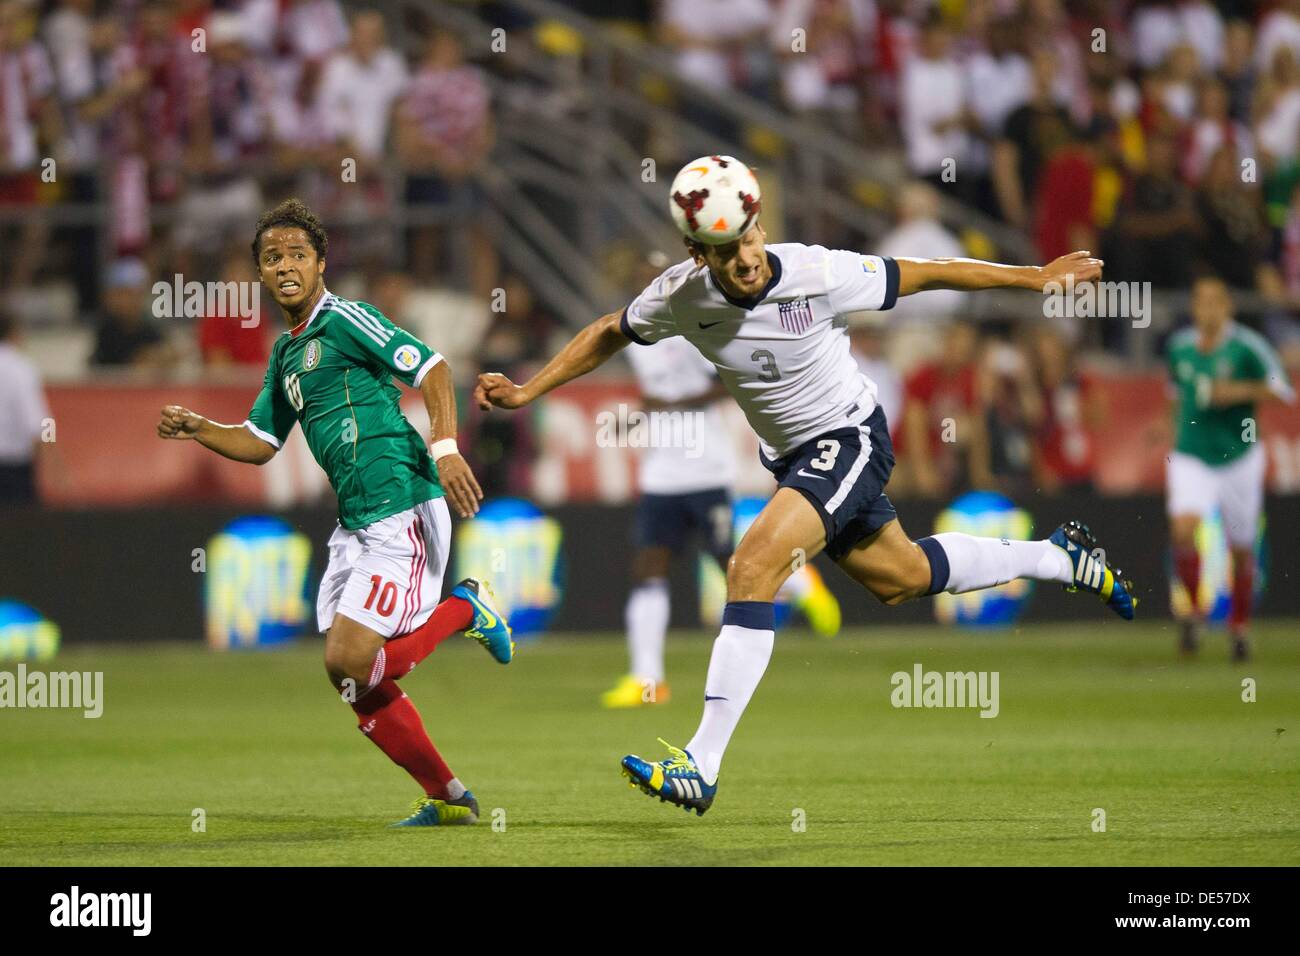 Columbus, Ohio, USA. 10th Sep, 2013. September 10, 2013: US Men's National Team defender Omar Gonzalez (3) heads the ball away from Mexico National Team forward Giovani Dos Santos (10) during the U.S. Men's National Team vs. Mexico National Team- World Cup Qualifier match at Columbus Crew Stadium - Columbus, OH. The United States Men's National Team defeated The Mexico National Team 2-0 and clinched a spot for the World Cup in Brazil. © csm/Alamy Live News Stock Photo